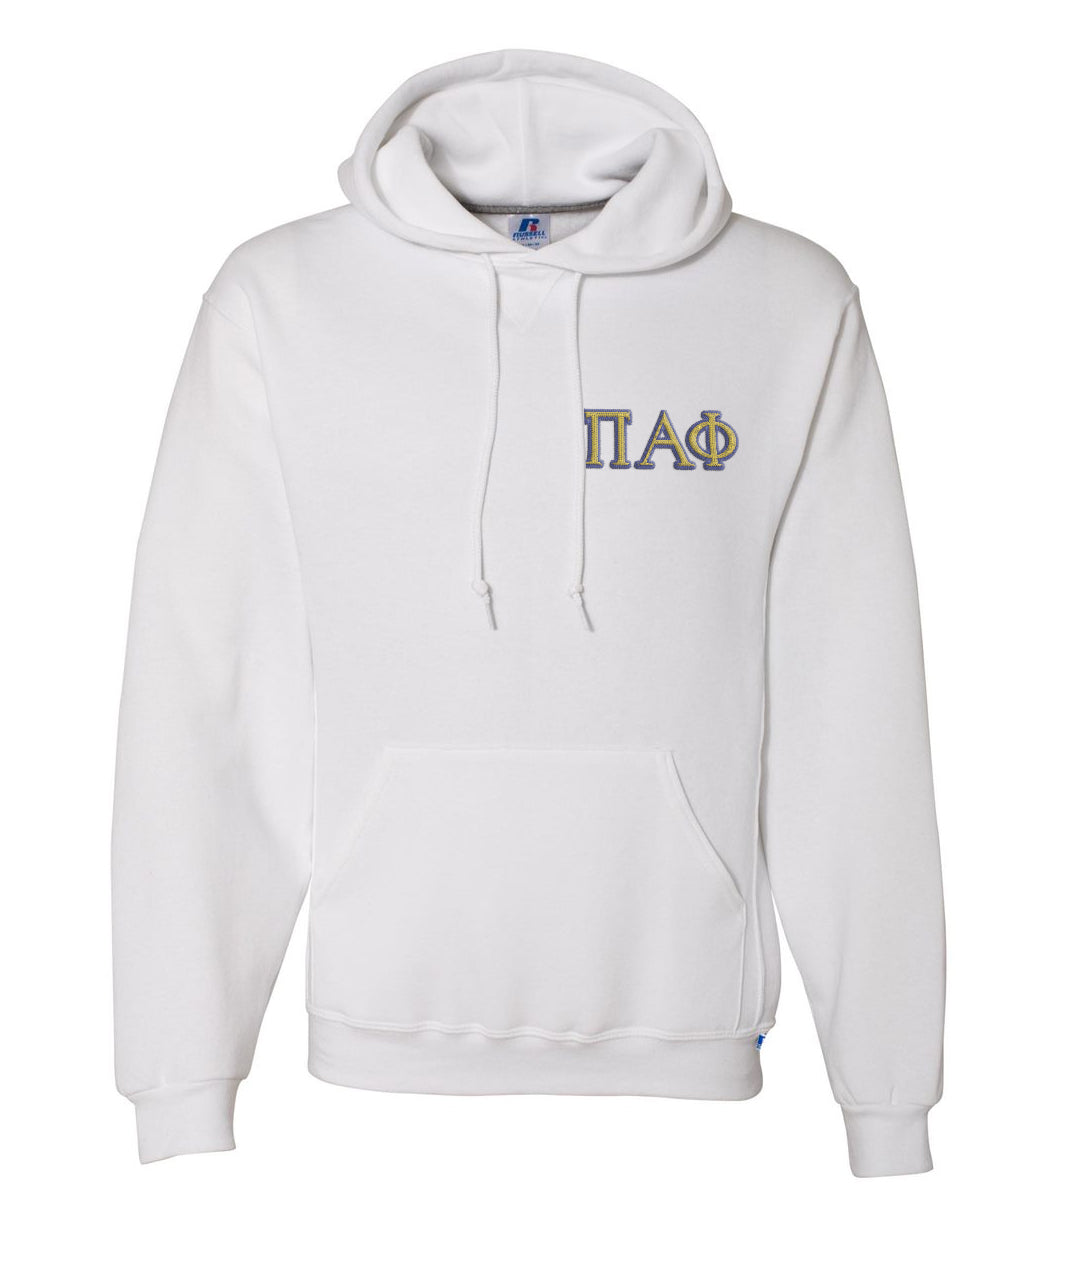 Pi Alpha Phi Embroidered Hoodie